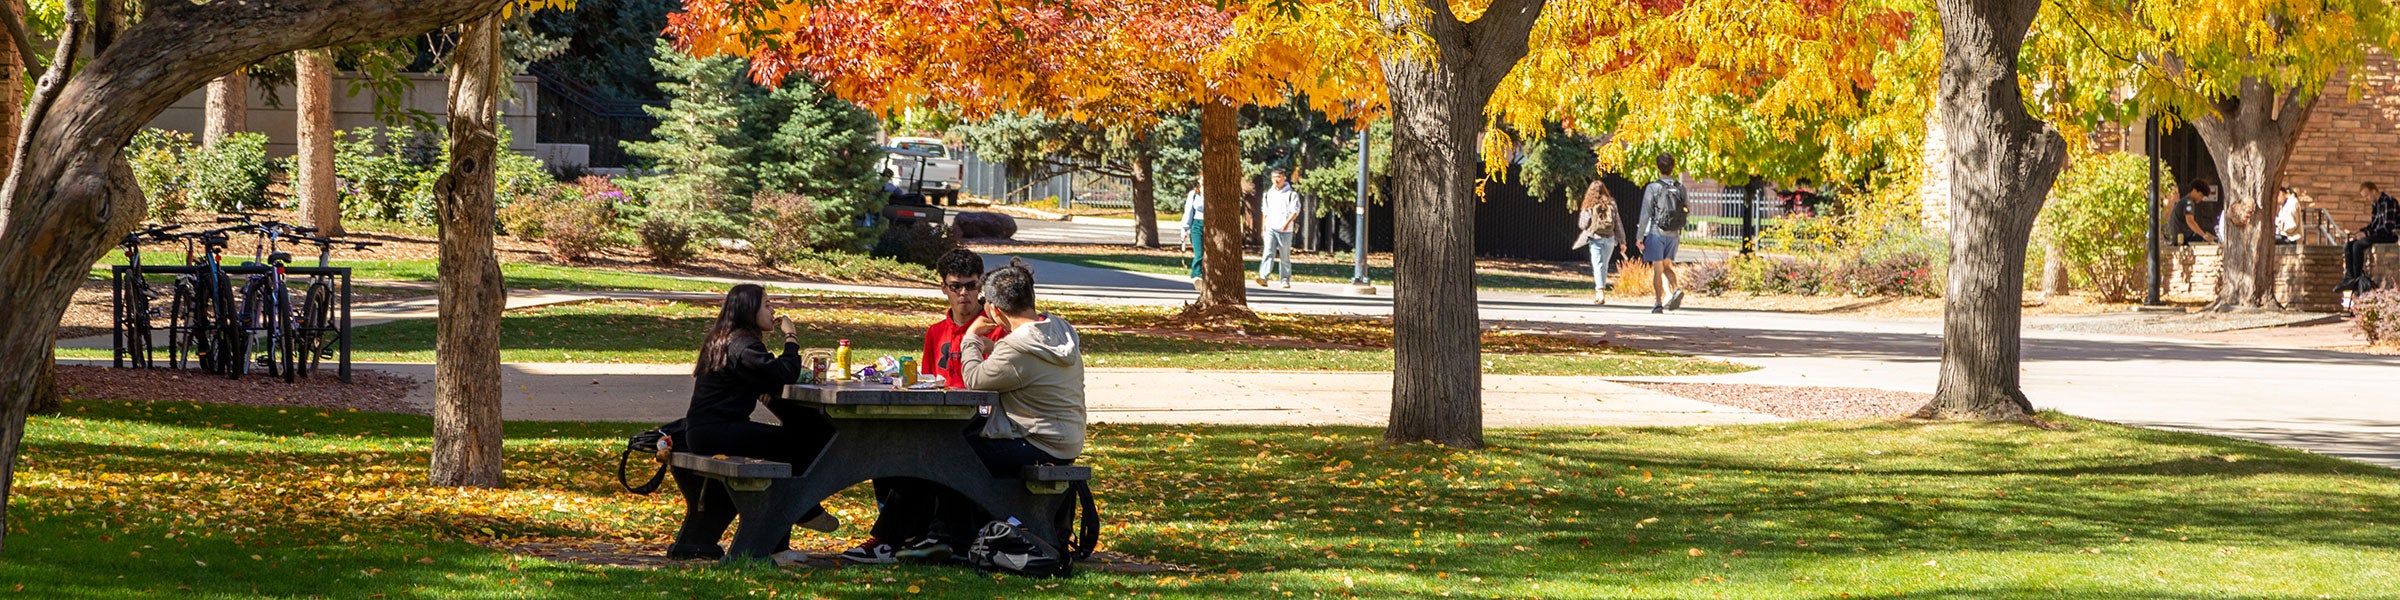 students on campus in fall